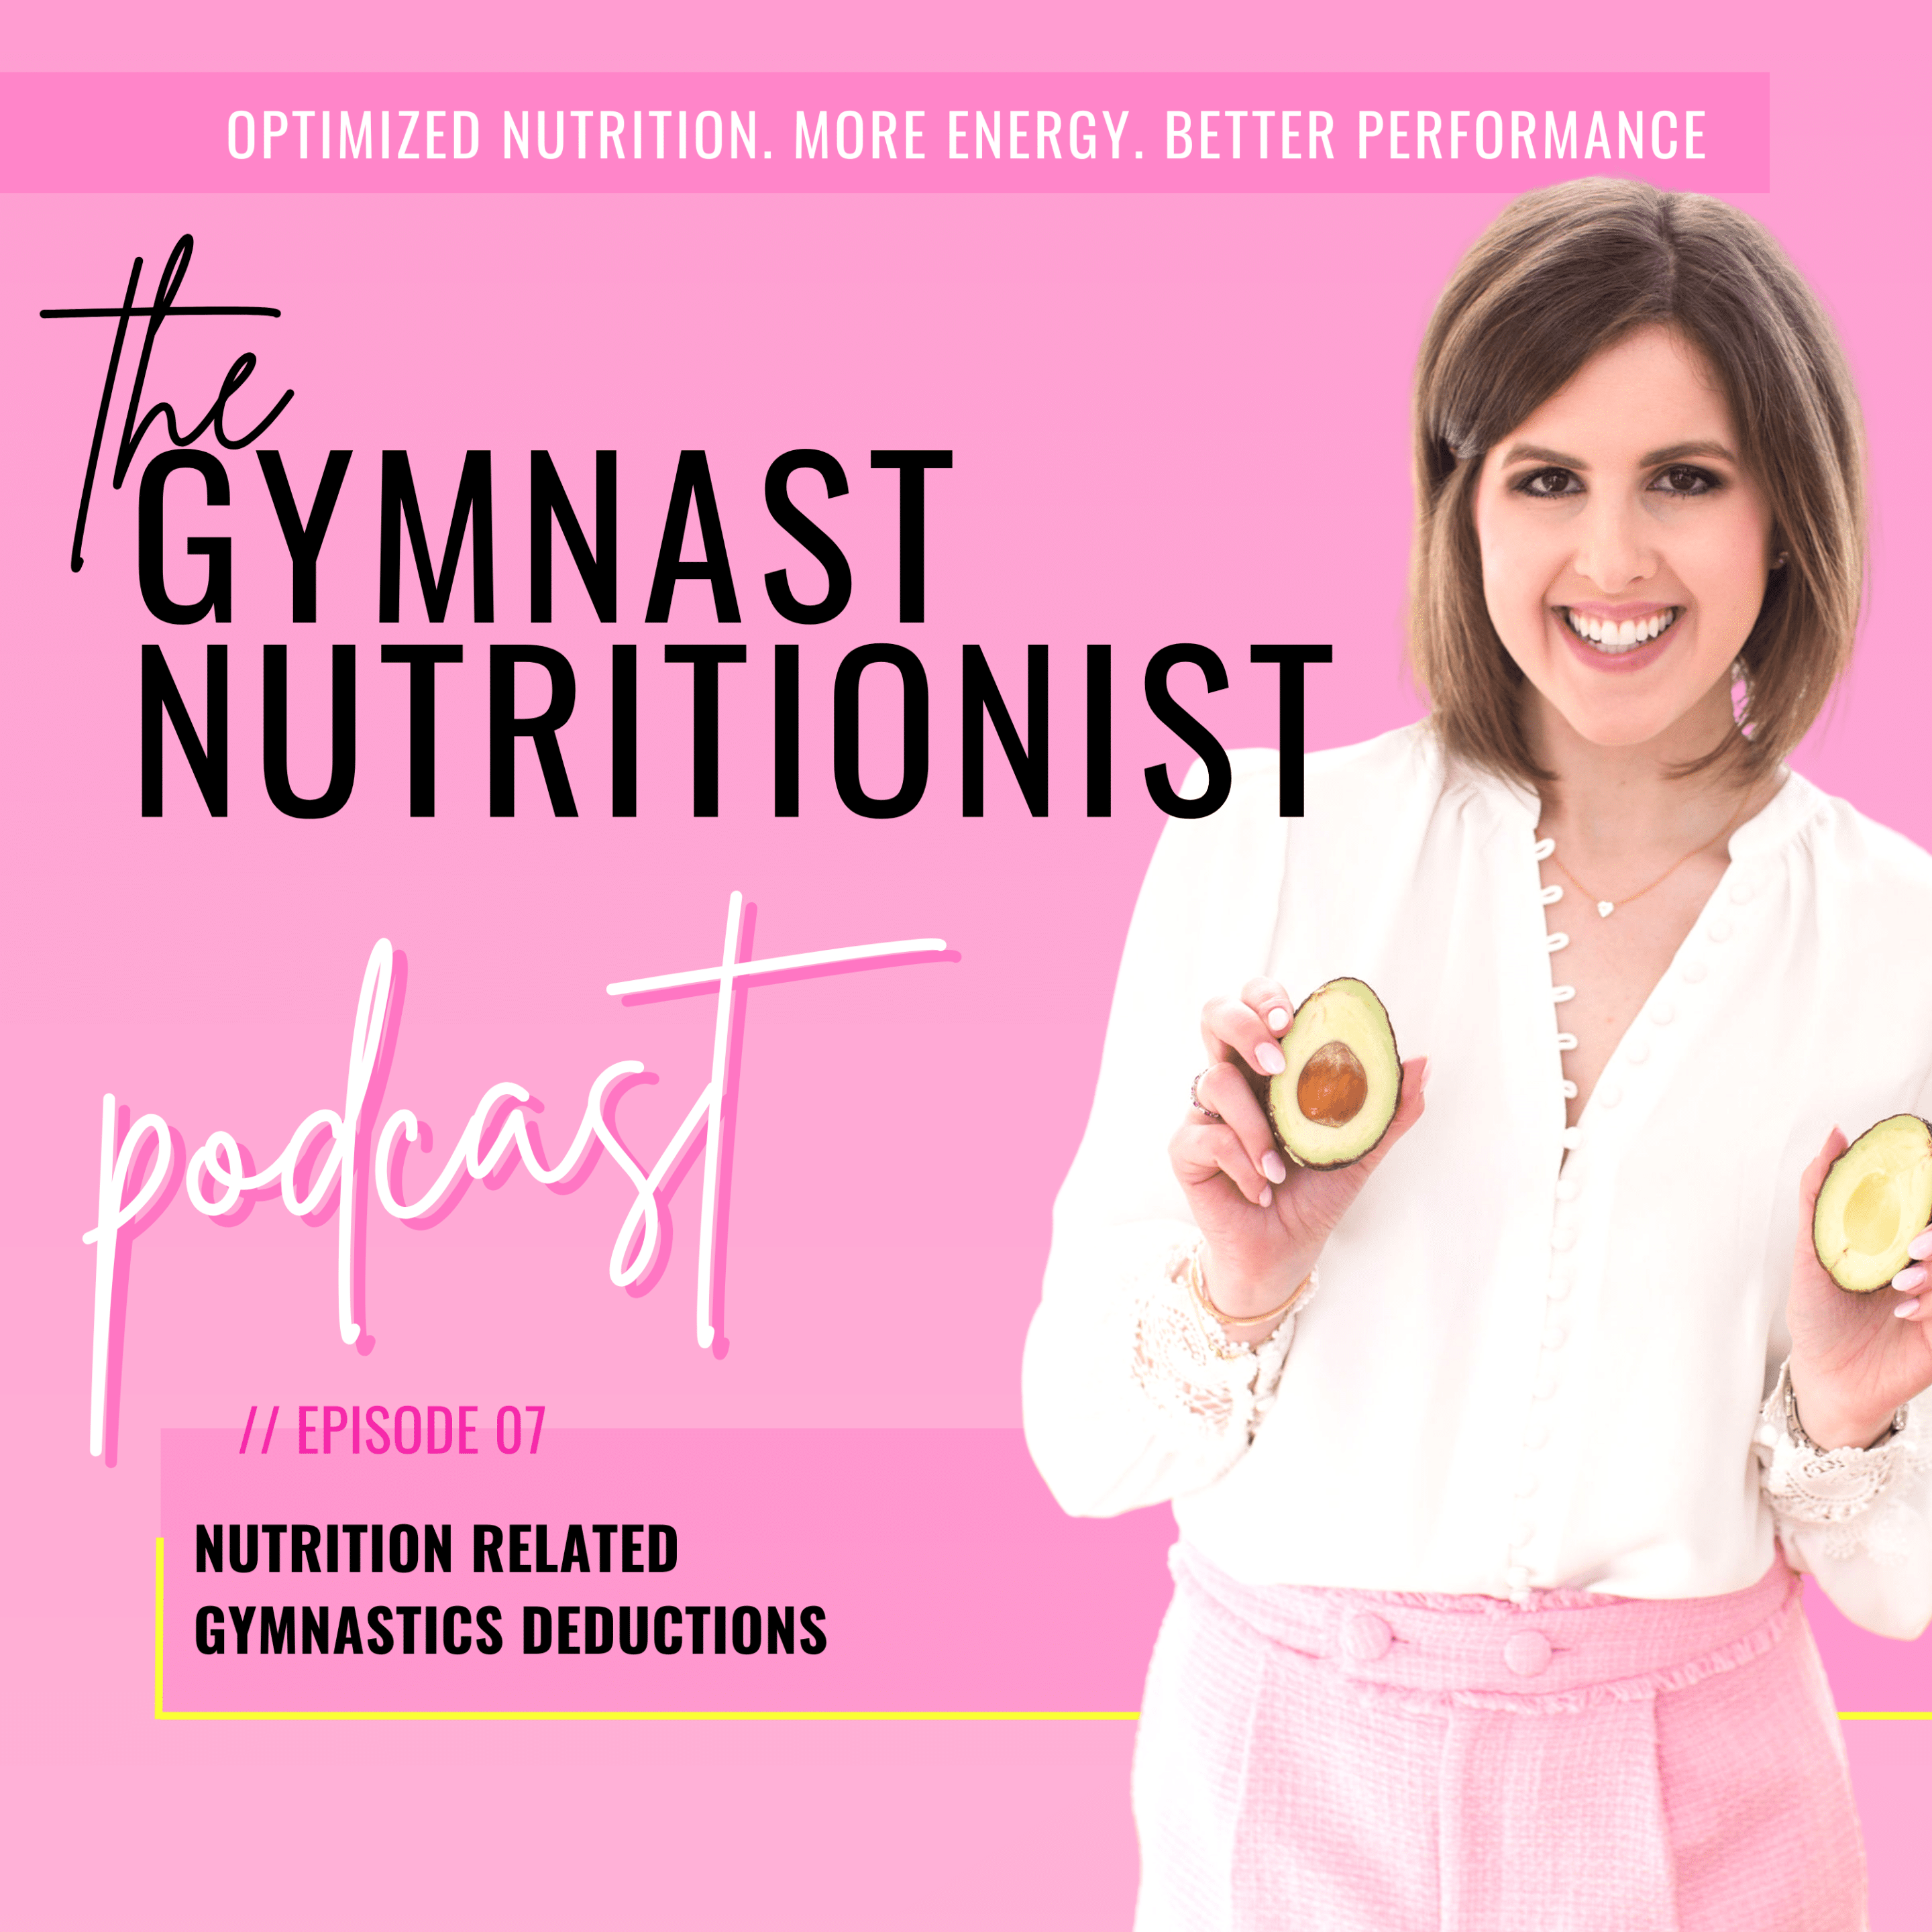 Episode 07: Nutrition Related Gymnastics Deductions